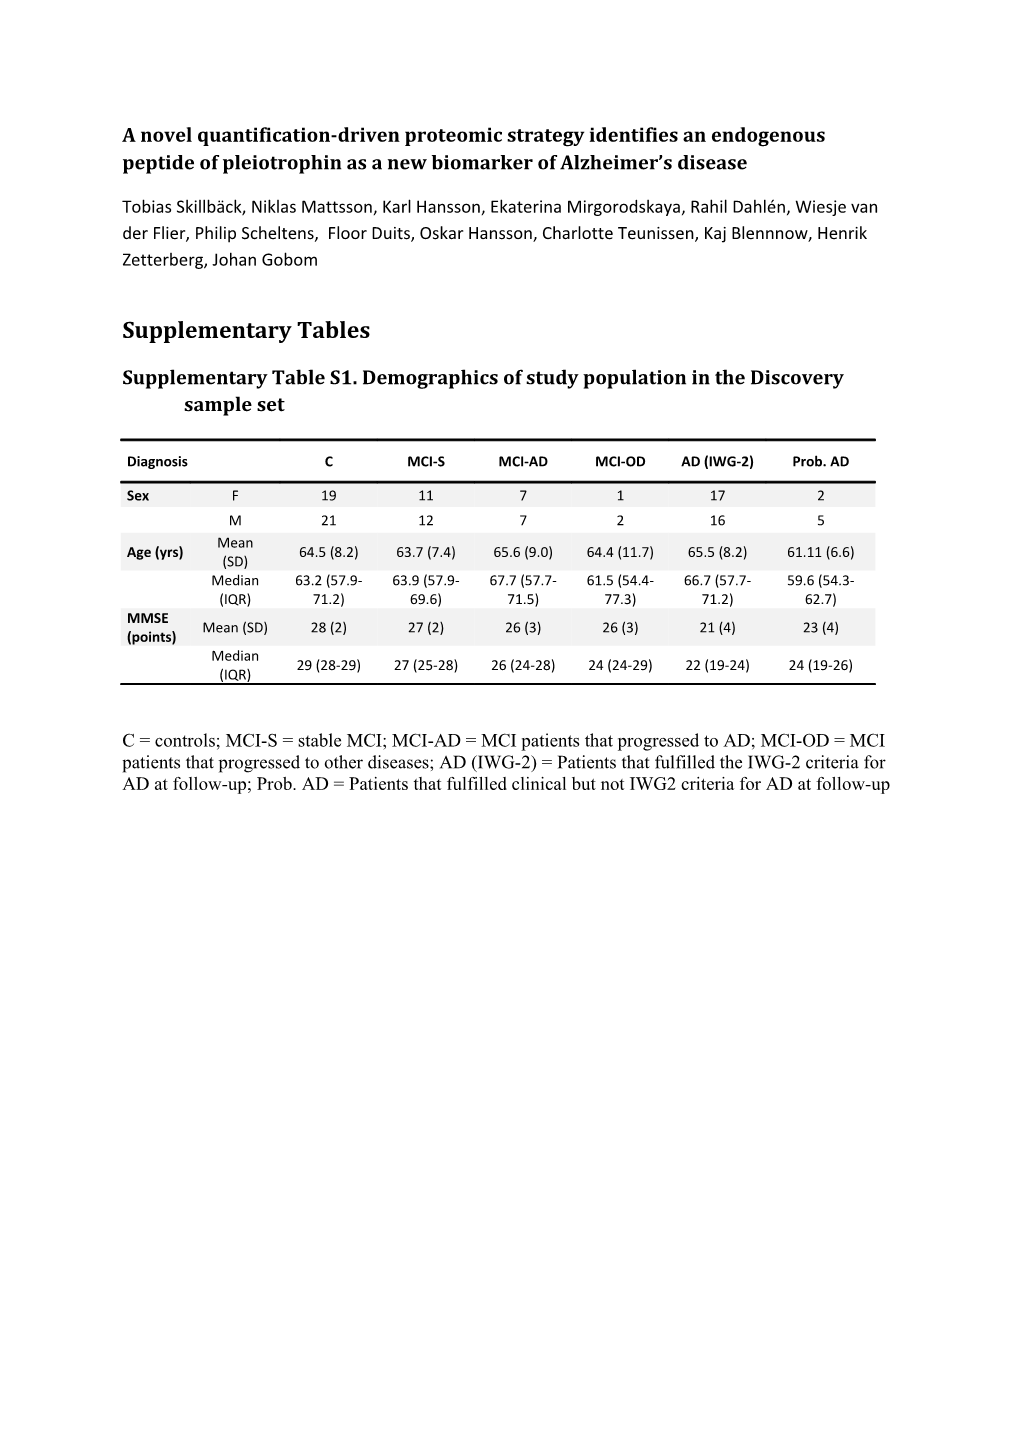 Supplementary Table S1. Demographics of Study Population in the Discovery Sample Set